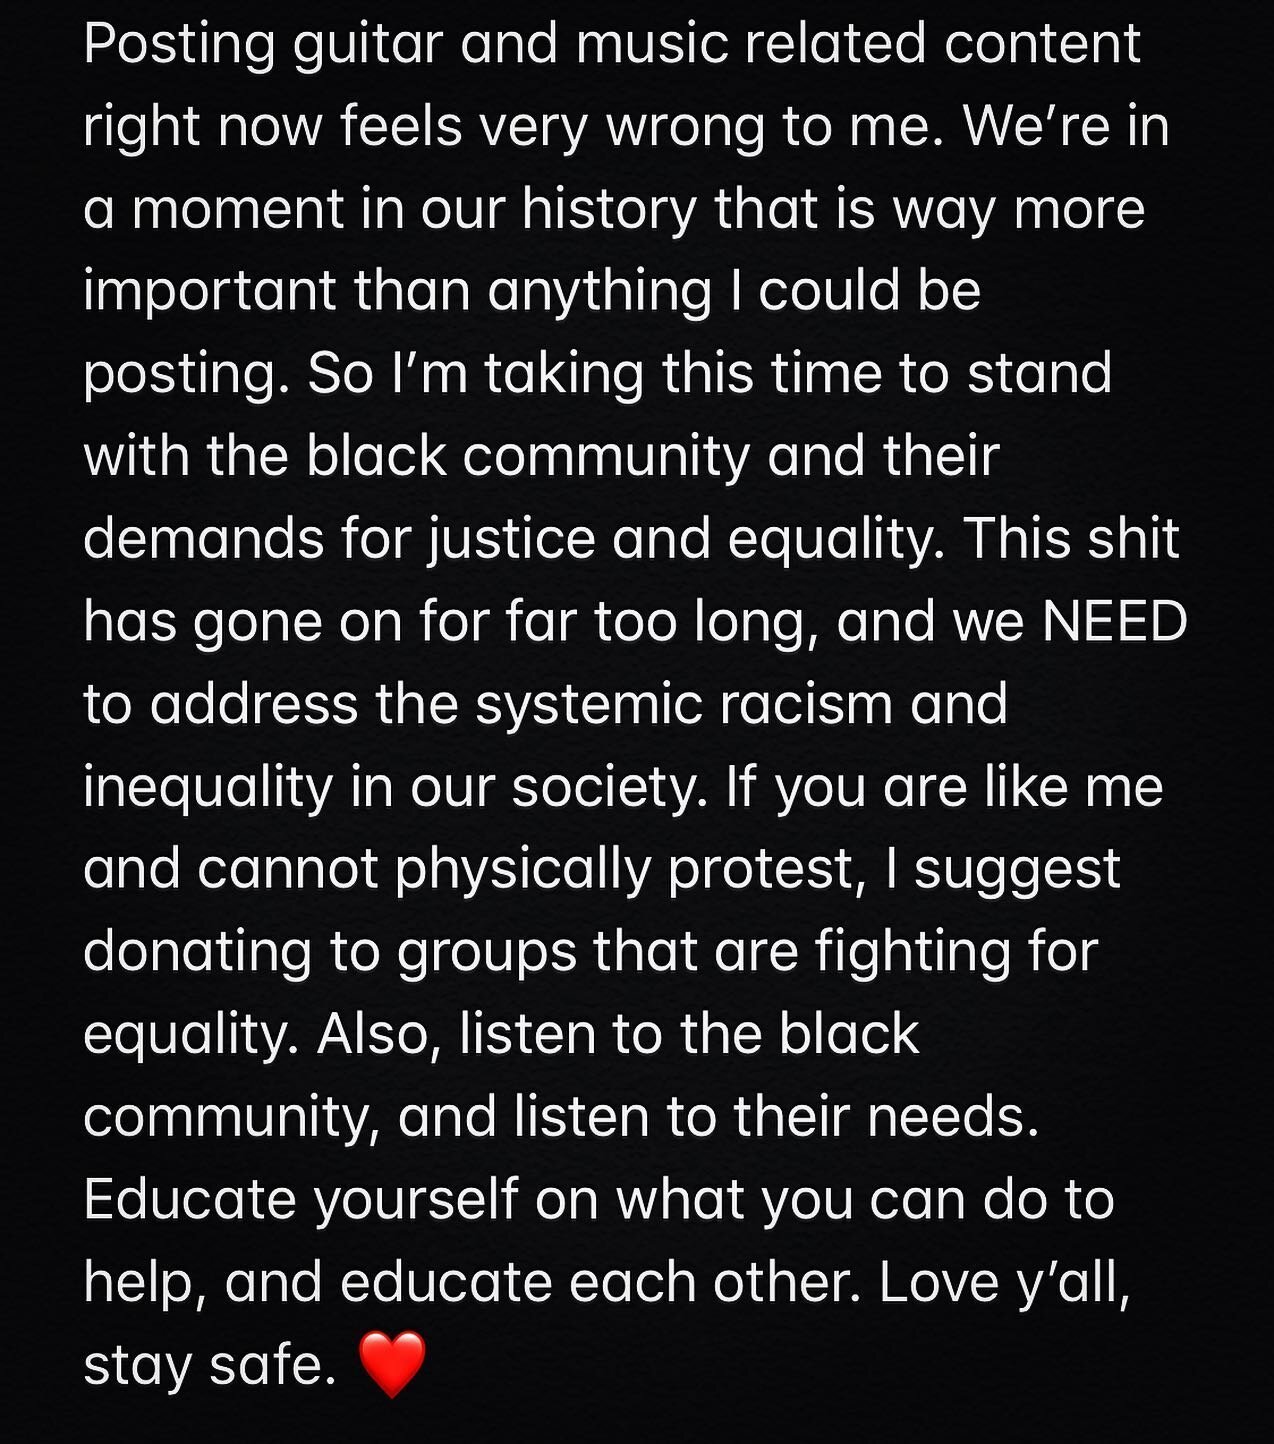 /// EQUALITY /// Here are some accounts that can use our support. Please donate if you can. @mnfreedomfund @unicorn.riot @blackvisionscollective @reclaimtheblock and there&rsquo;s a link in my bio for the George Floyd Memorial fund. Love y&rsquo;all.